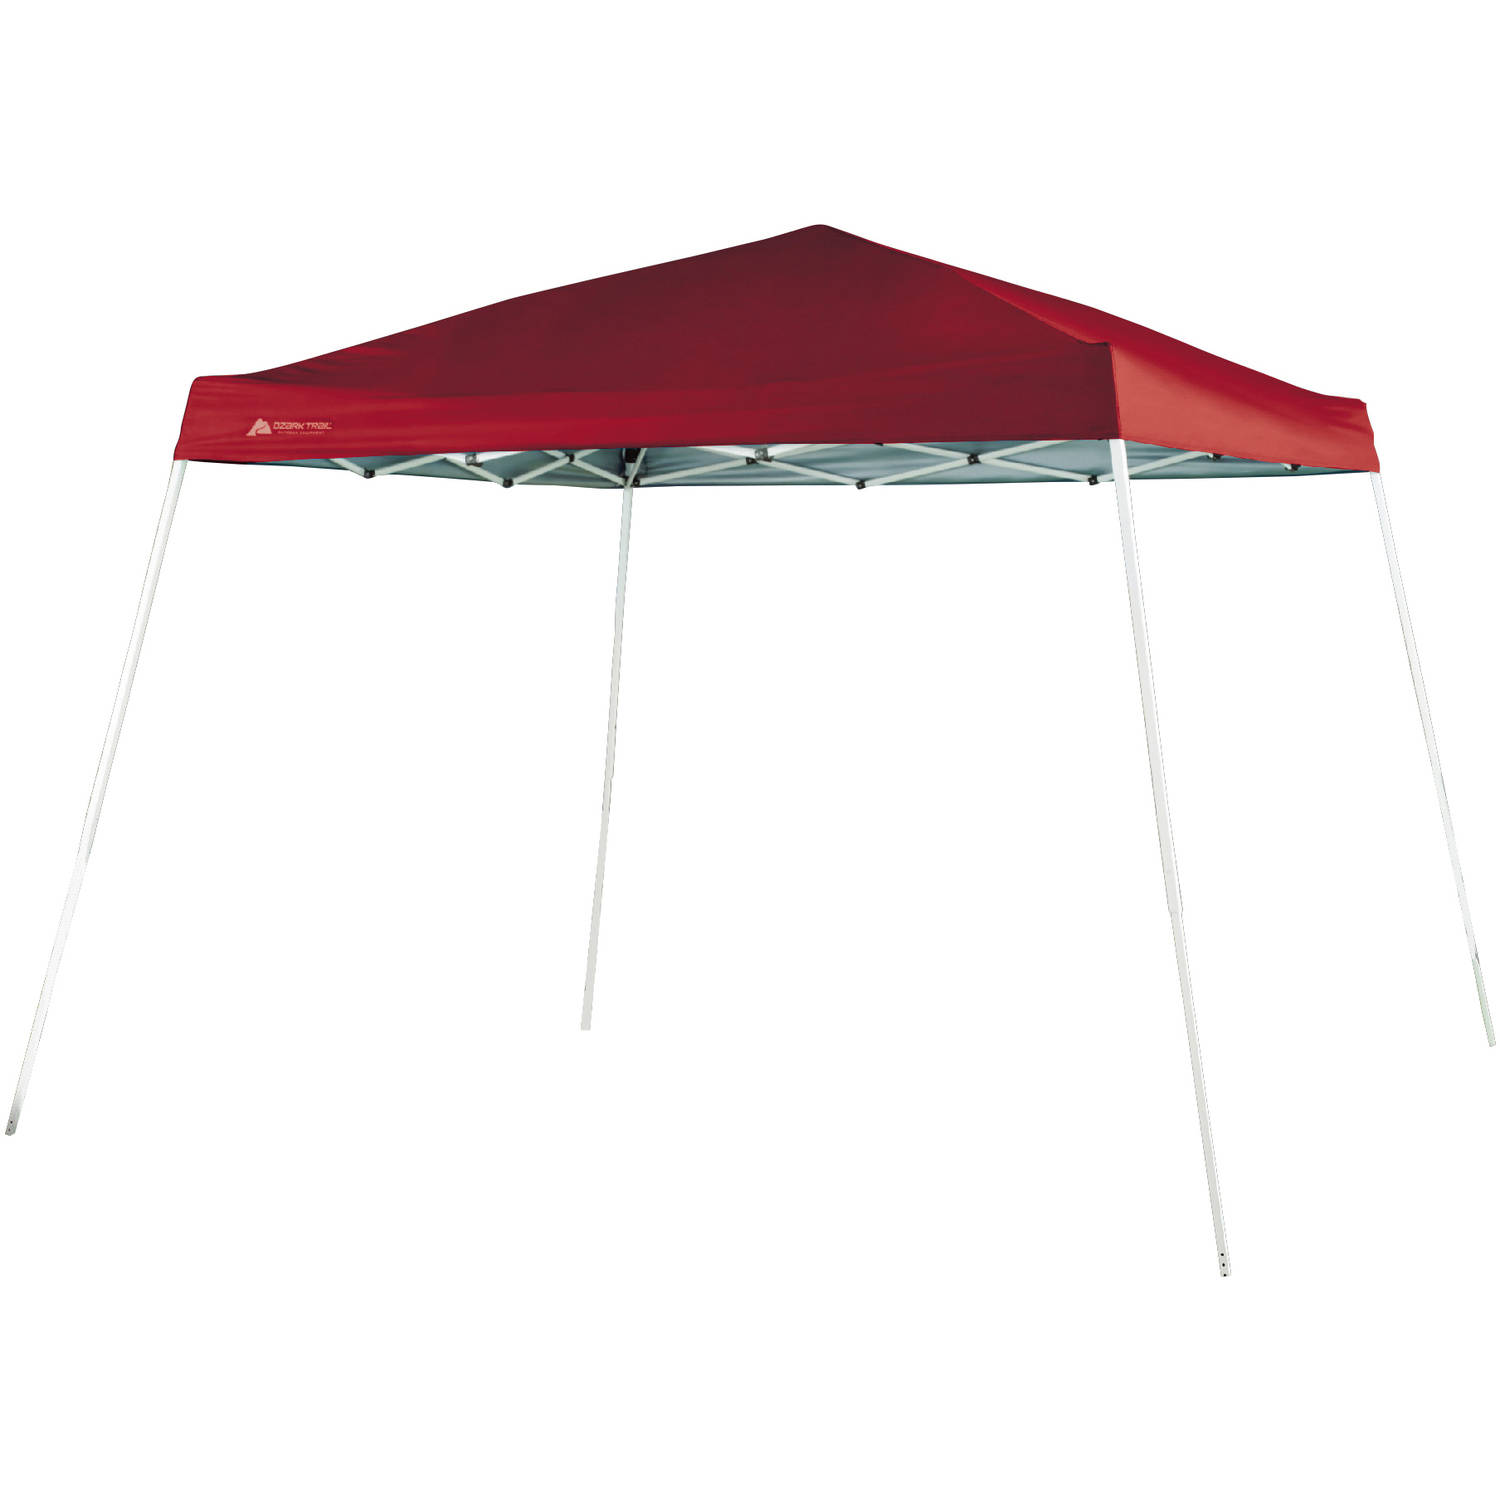 Portable Instant Canopy on Sal...